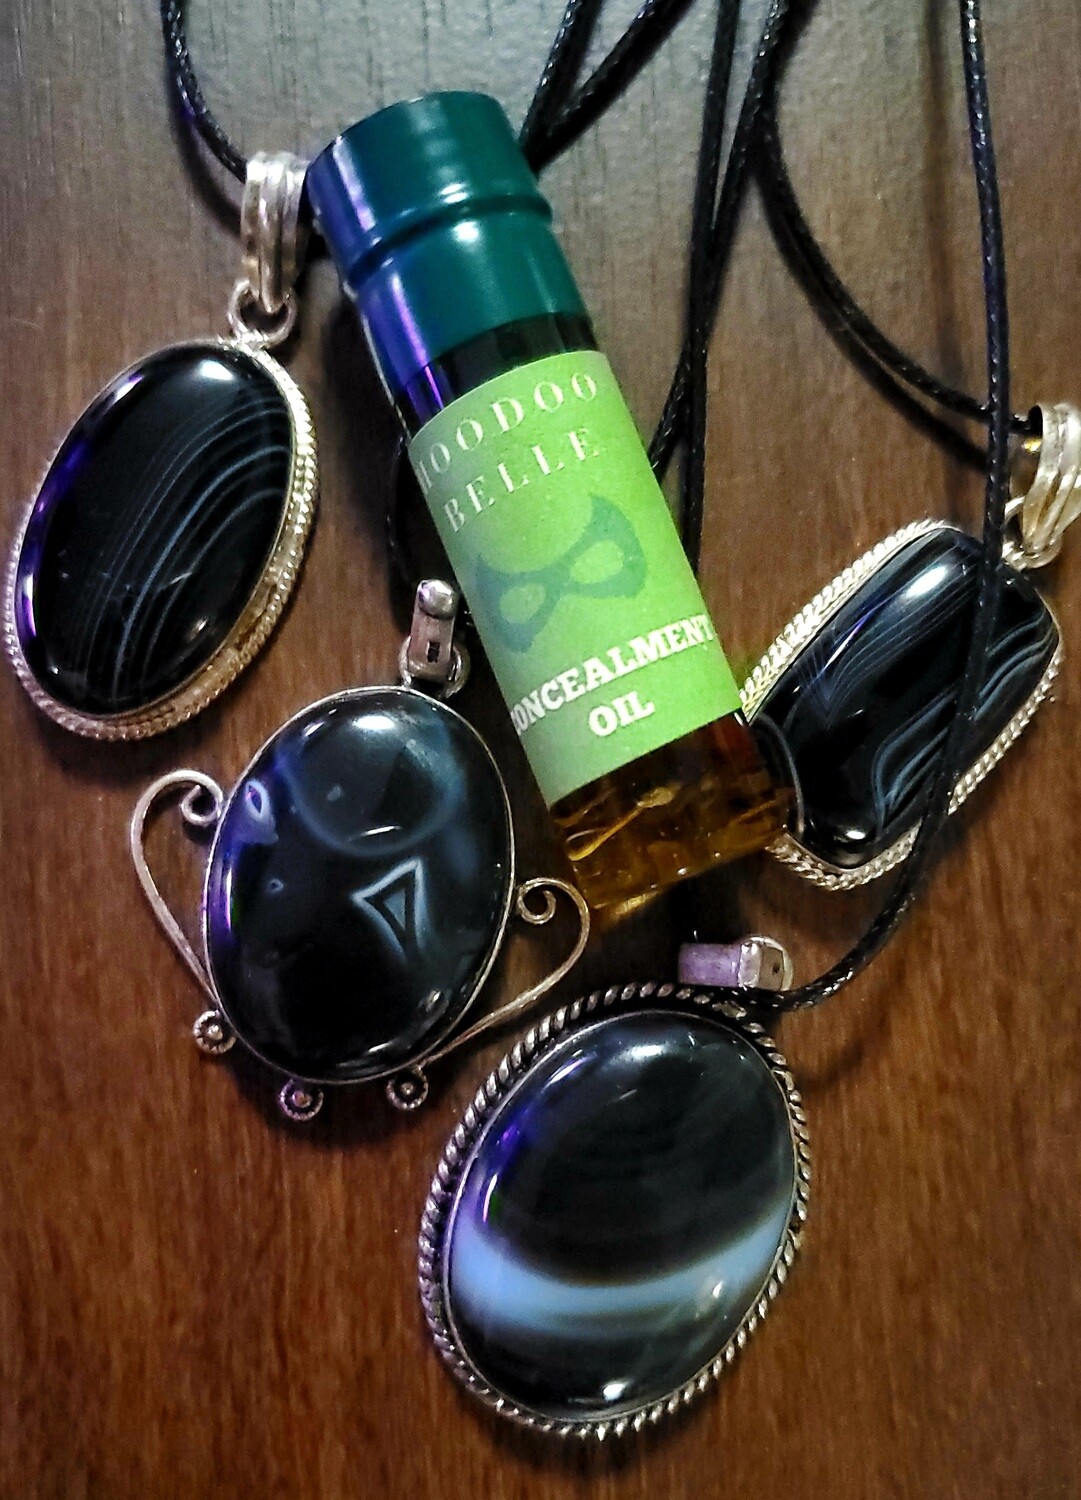 Onyx Invisibility Amulet & Oil